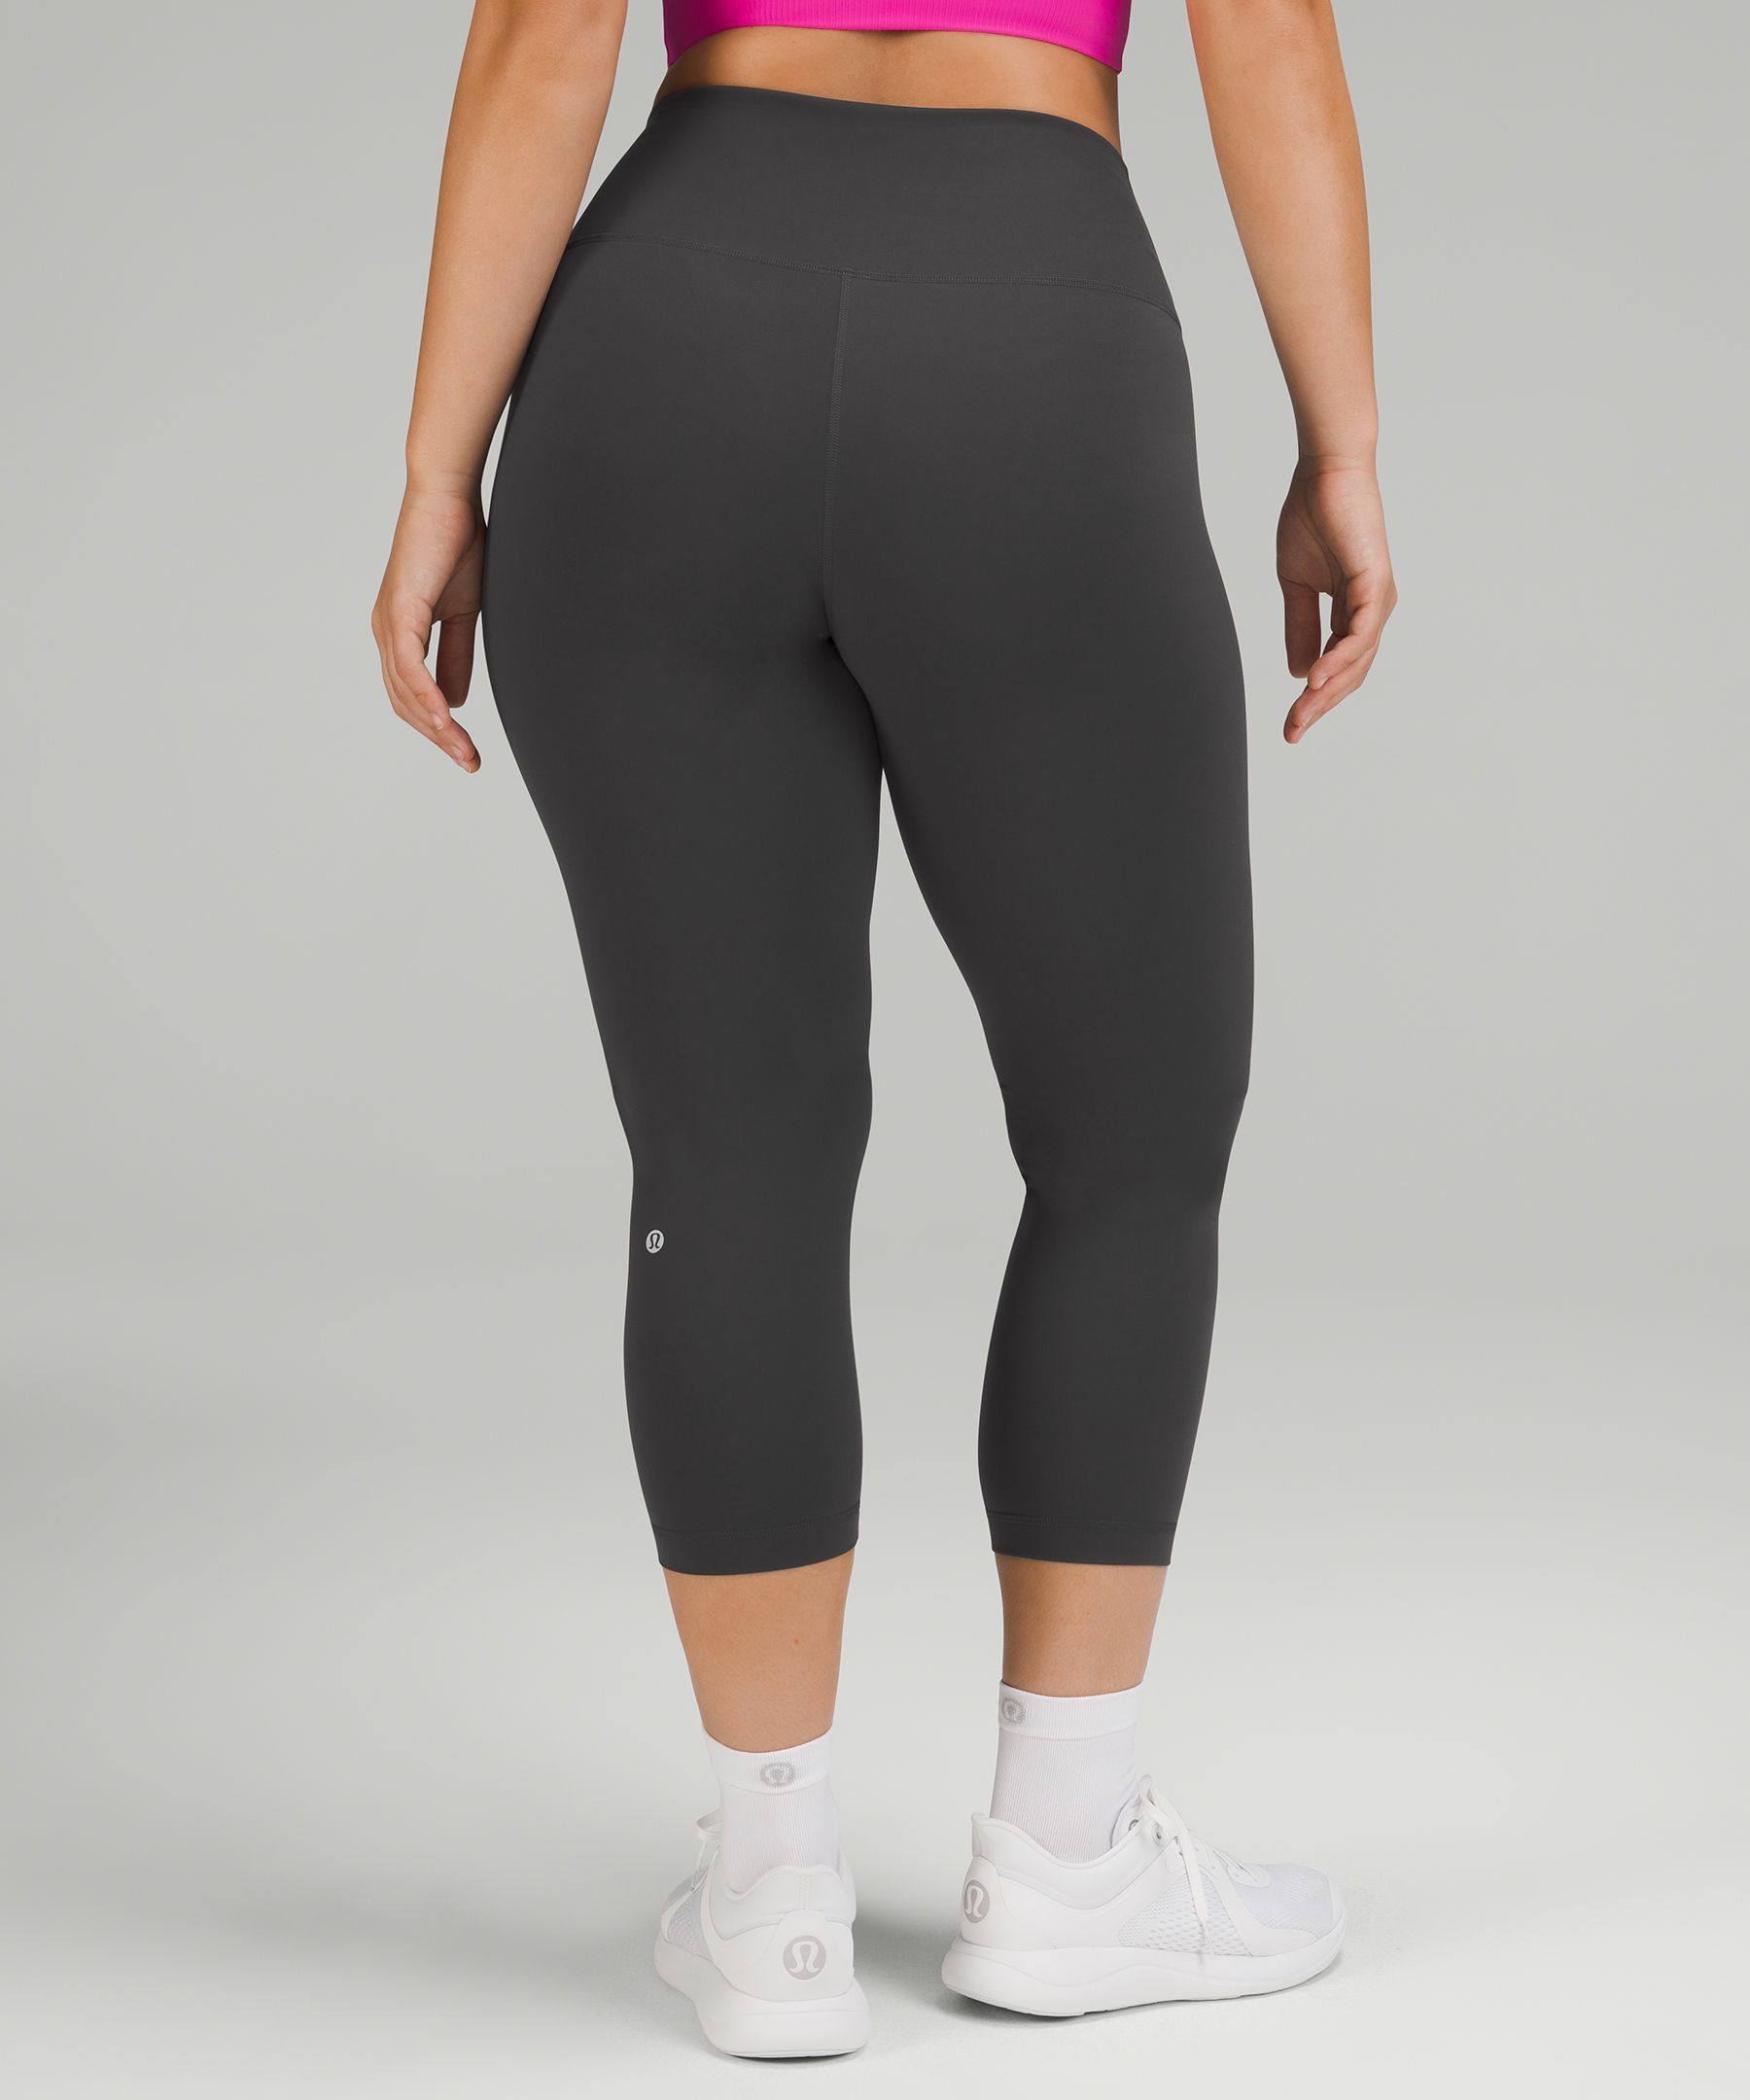 Lululemon Wunder Train Contour Fit High-Rise Tight 28 - Smoked